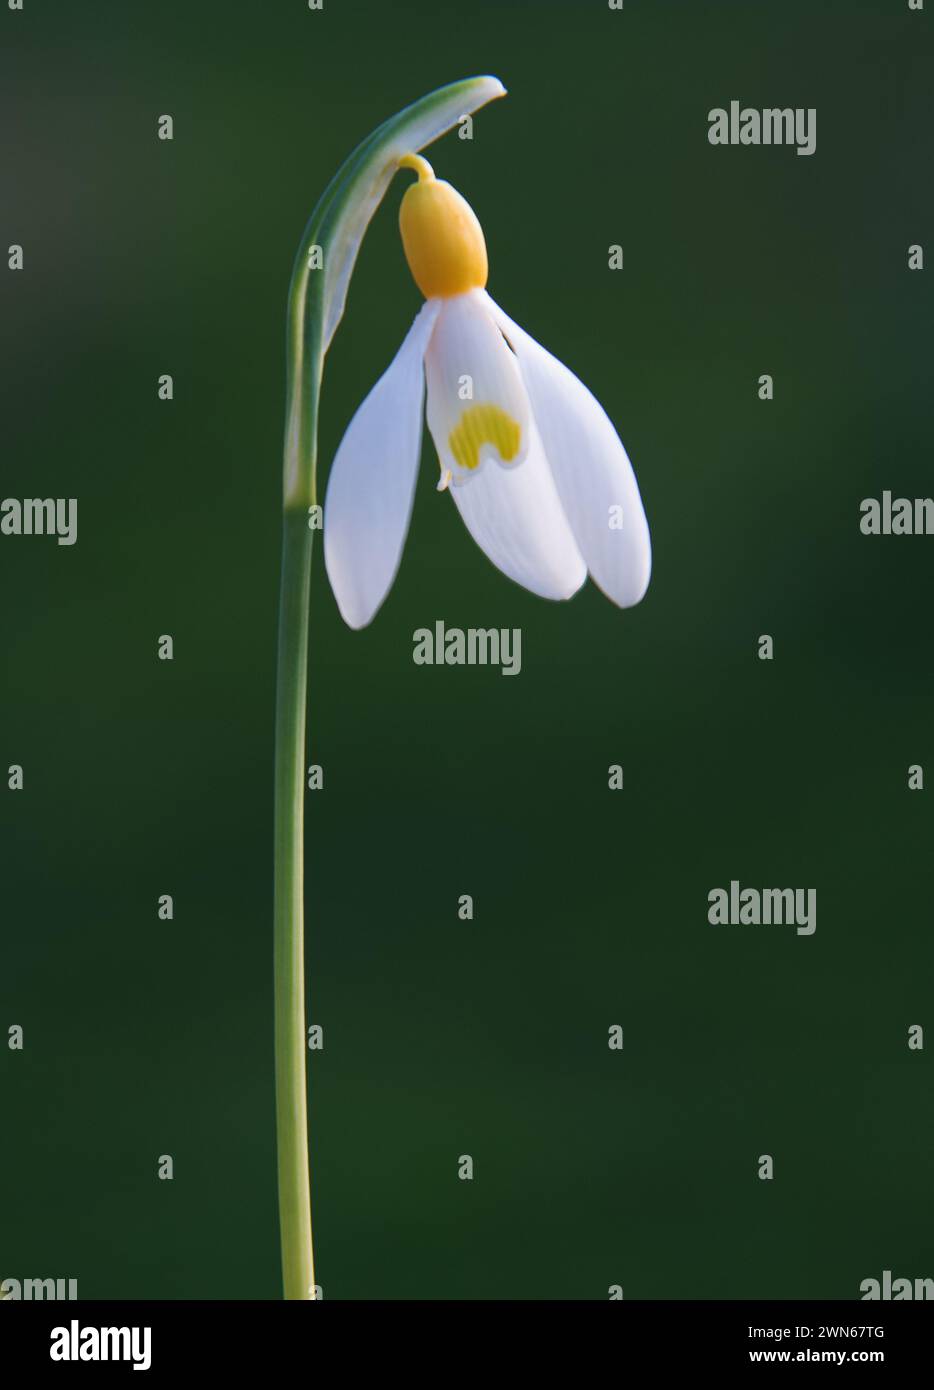 Galanthus 'Primrose Warburg' an old snowdrop cultivar, with grey-green, strap-like leaves.. The flowers have a distinctive, intense-yellow ovary. The Stock Photo